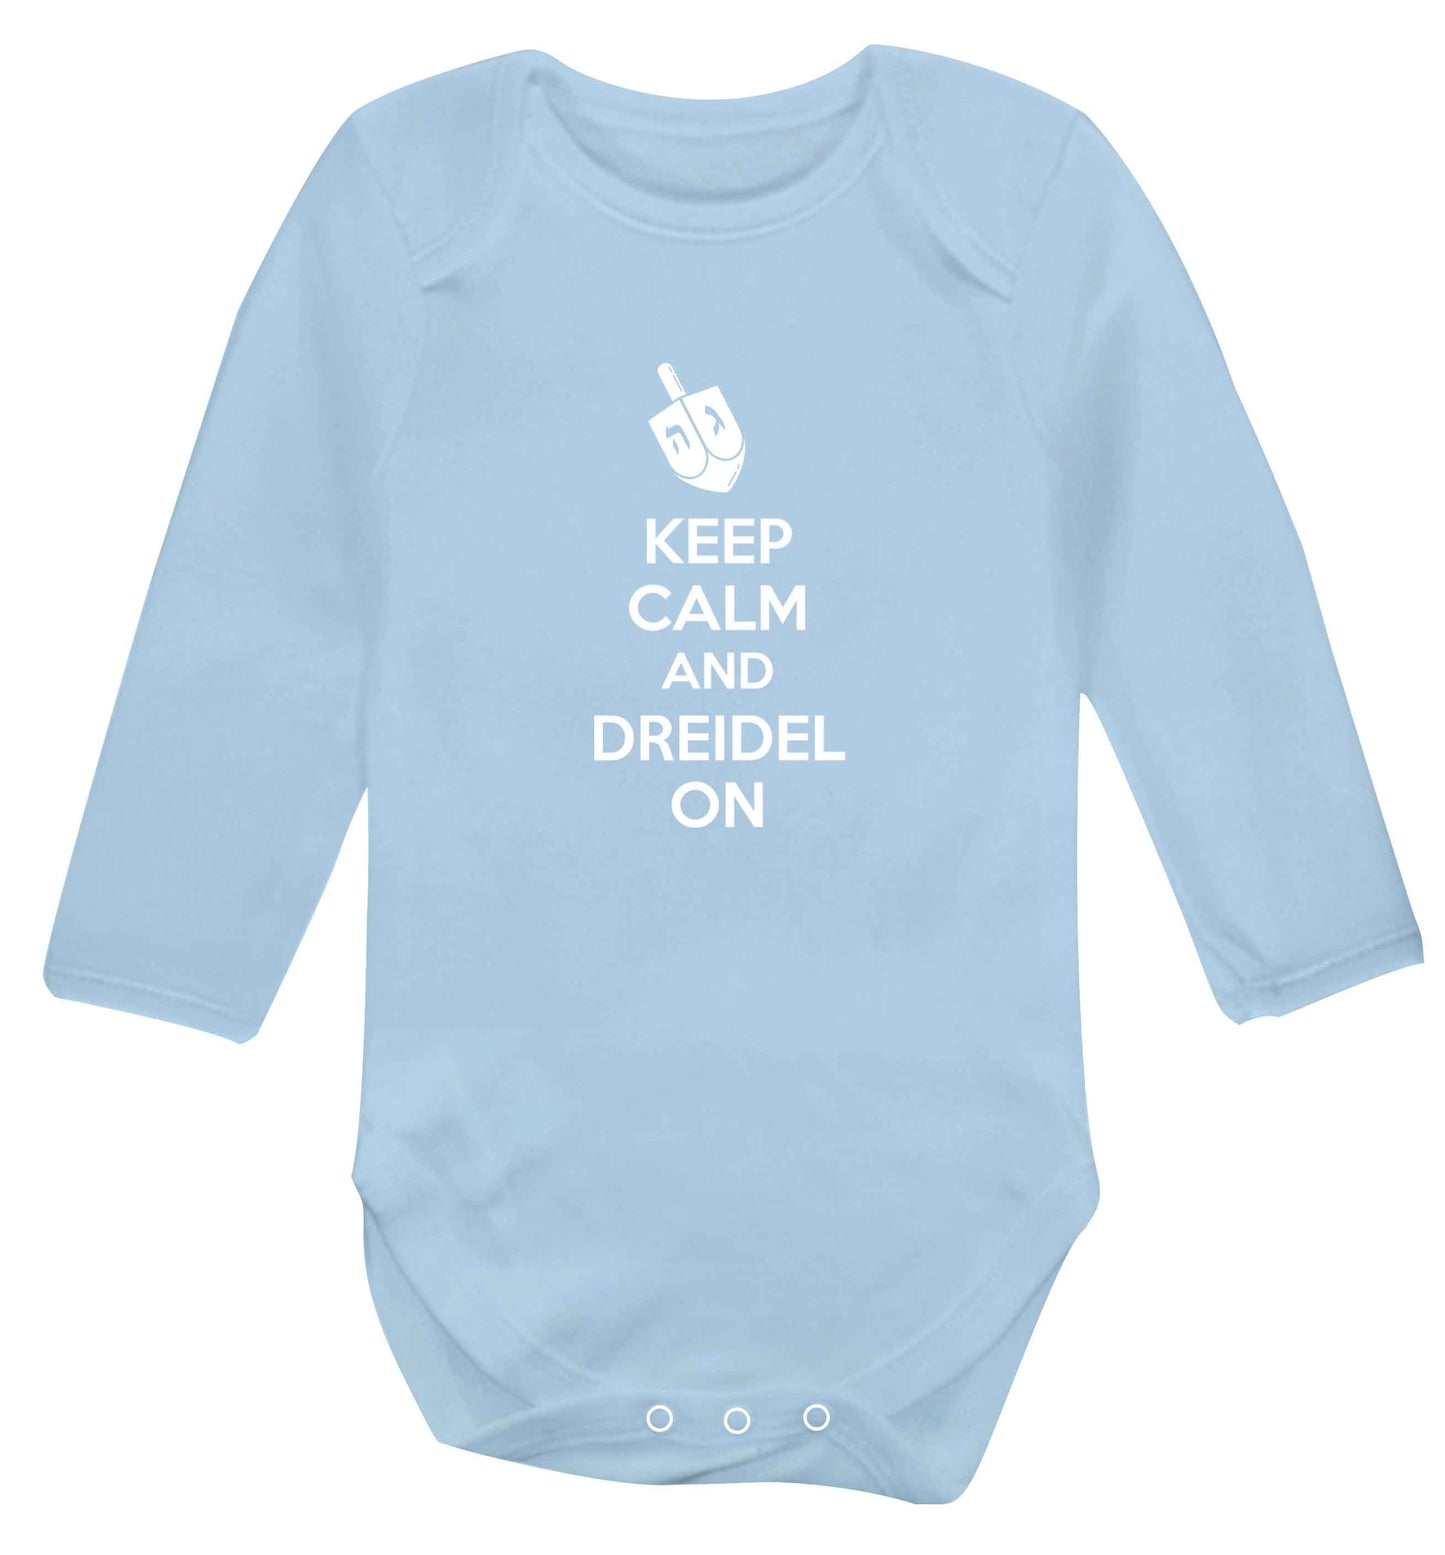 Keep calm and dreidel on baby vest long sleeved pale blue 6-12 months